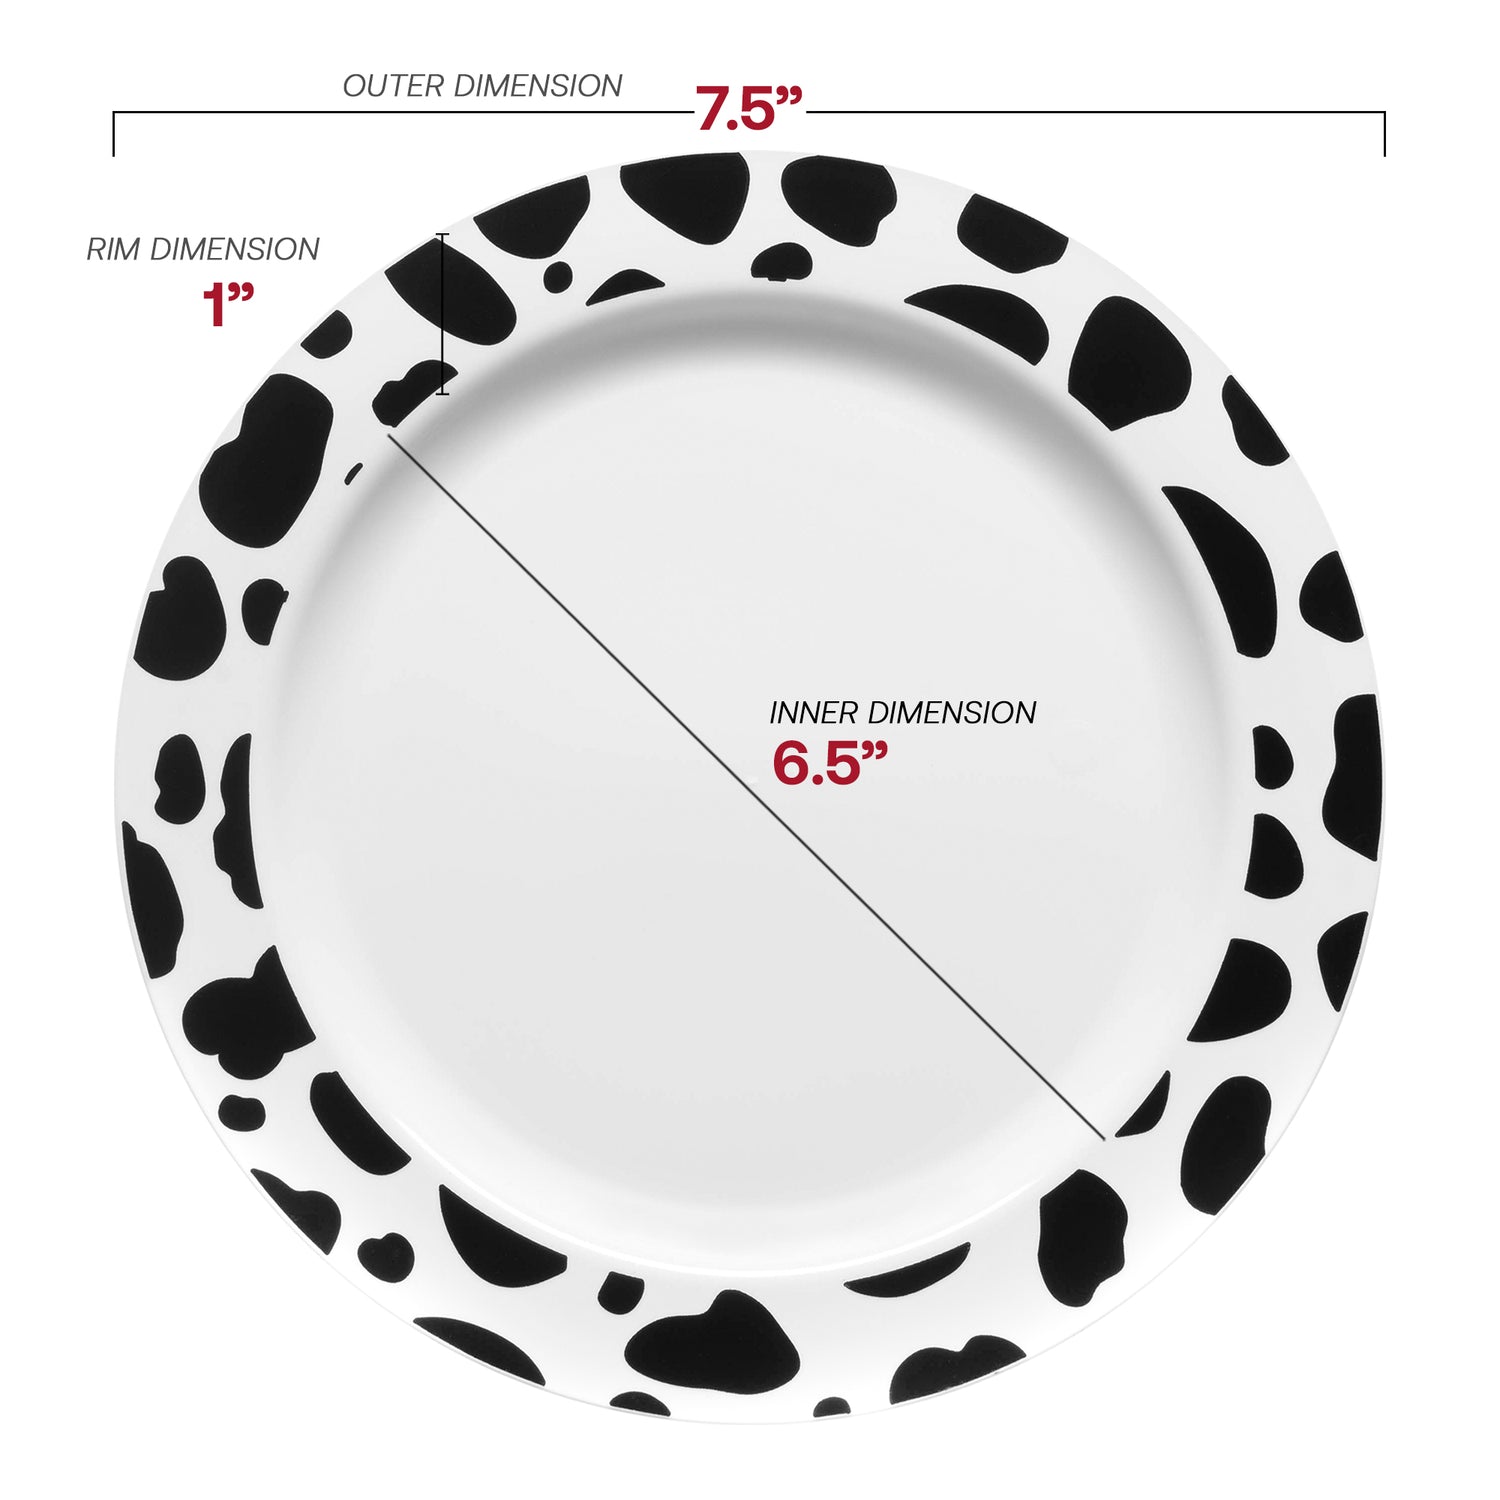 White with Black Dalmatian Spots Round Disposable Plastic Appetizer/Salad Plates (7.5") Dimension | The Kaya Collection